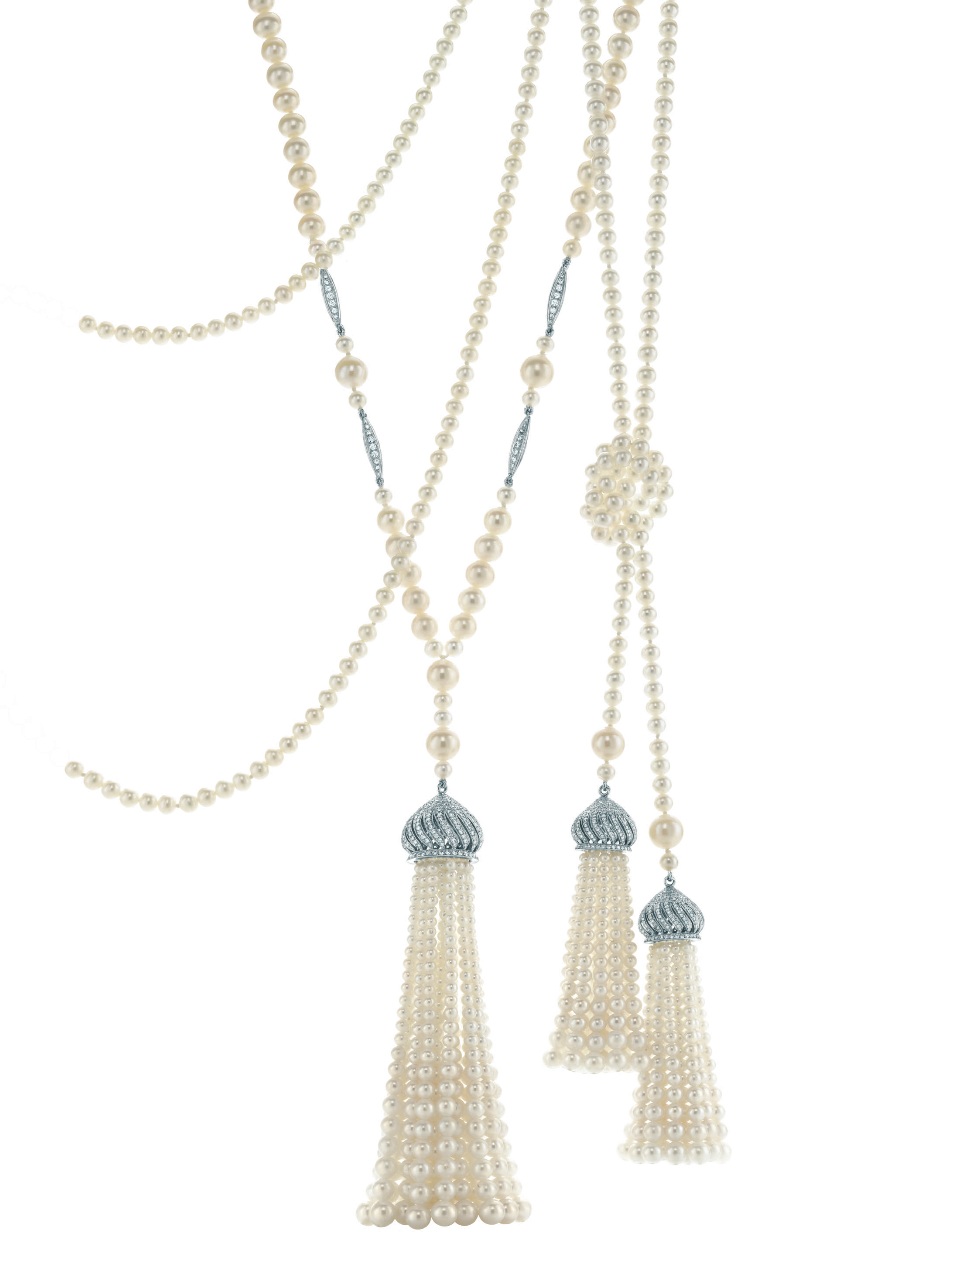 Great Gatsby Collection Pearl Tassel Necklace from Tiffany & Co